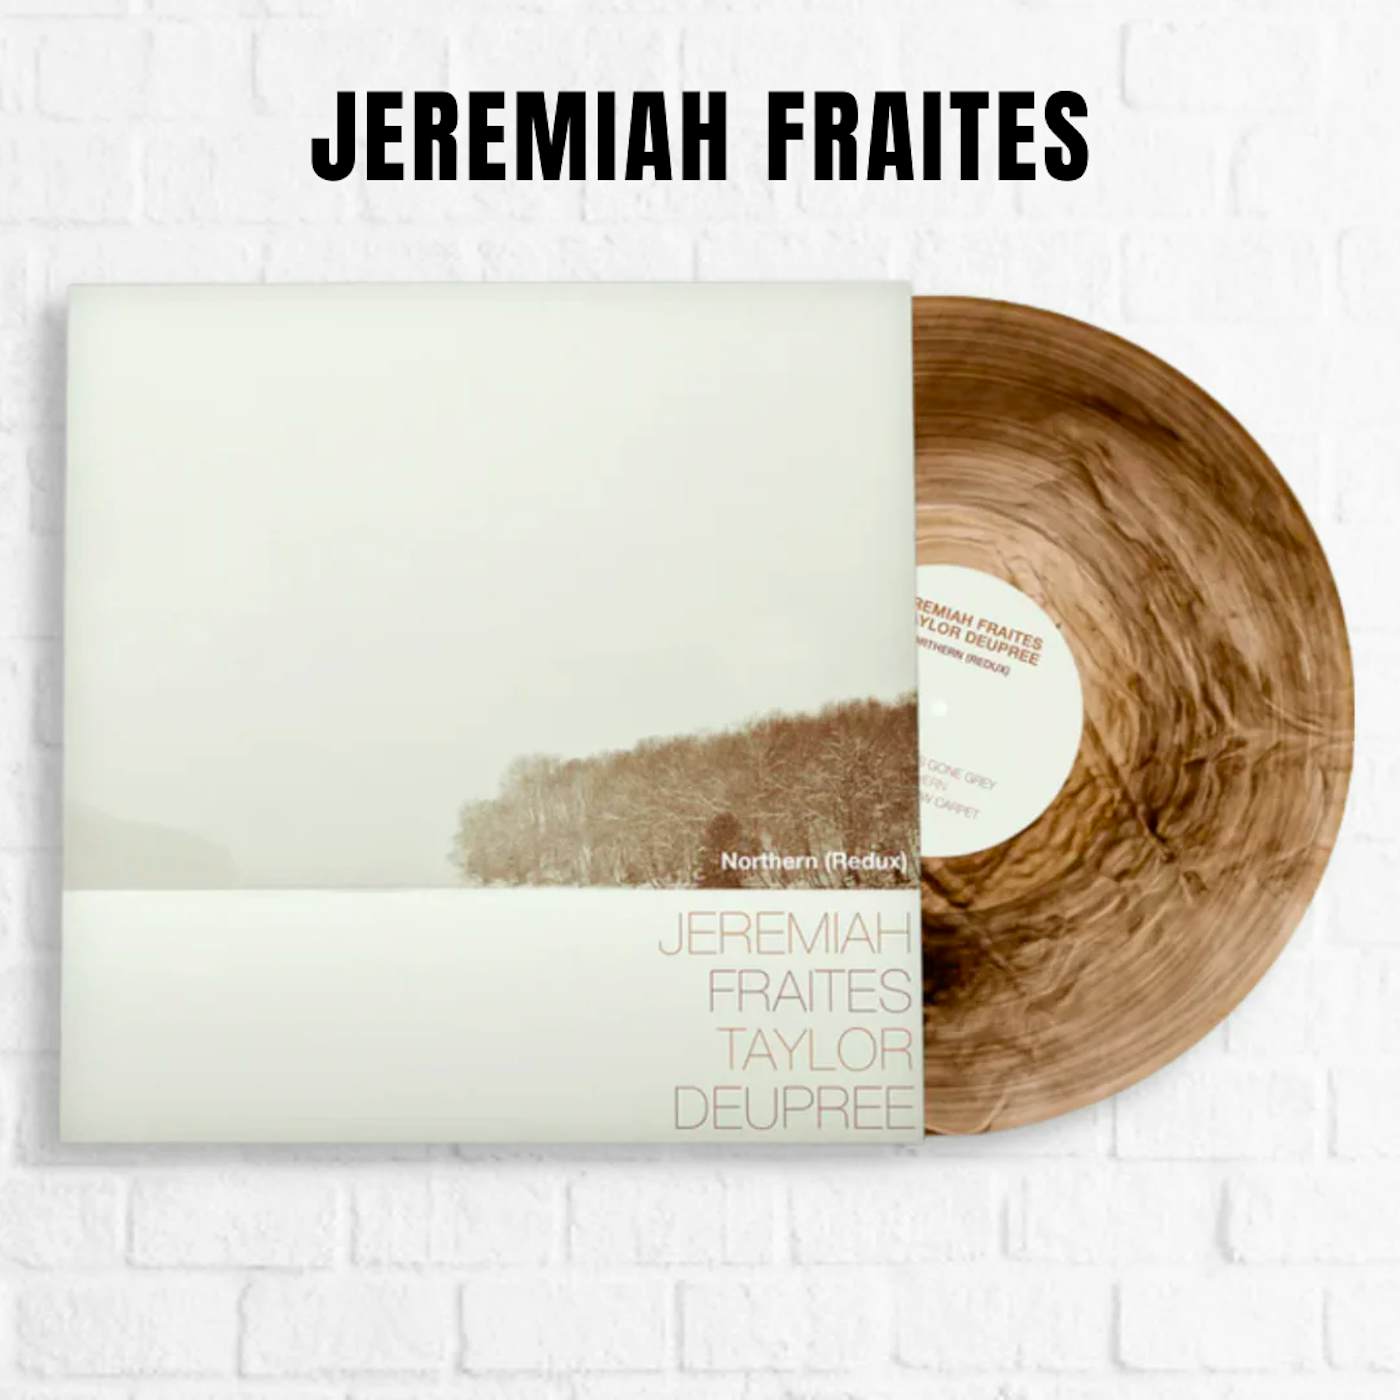 Jeremiah Fraites Northern (Redux) [Limited Black and Clear Galaxy]